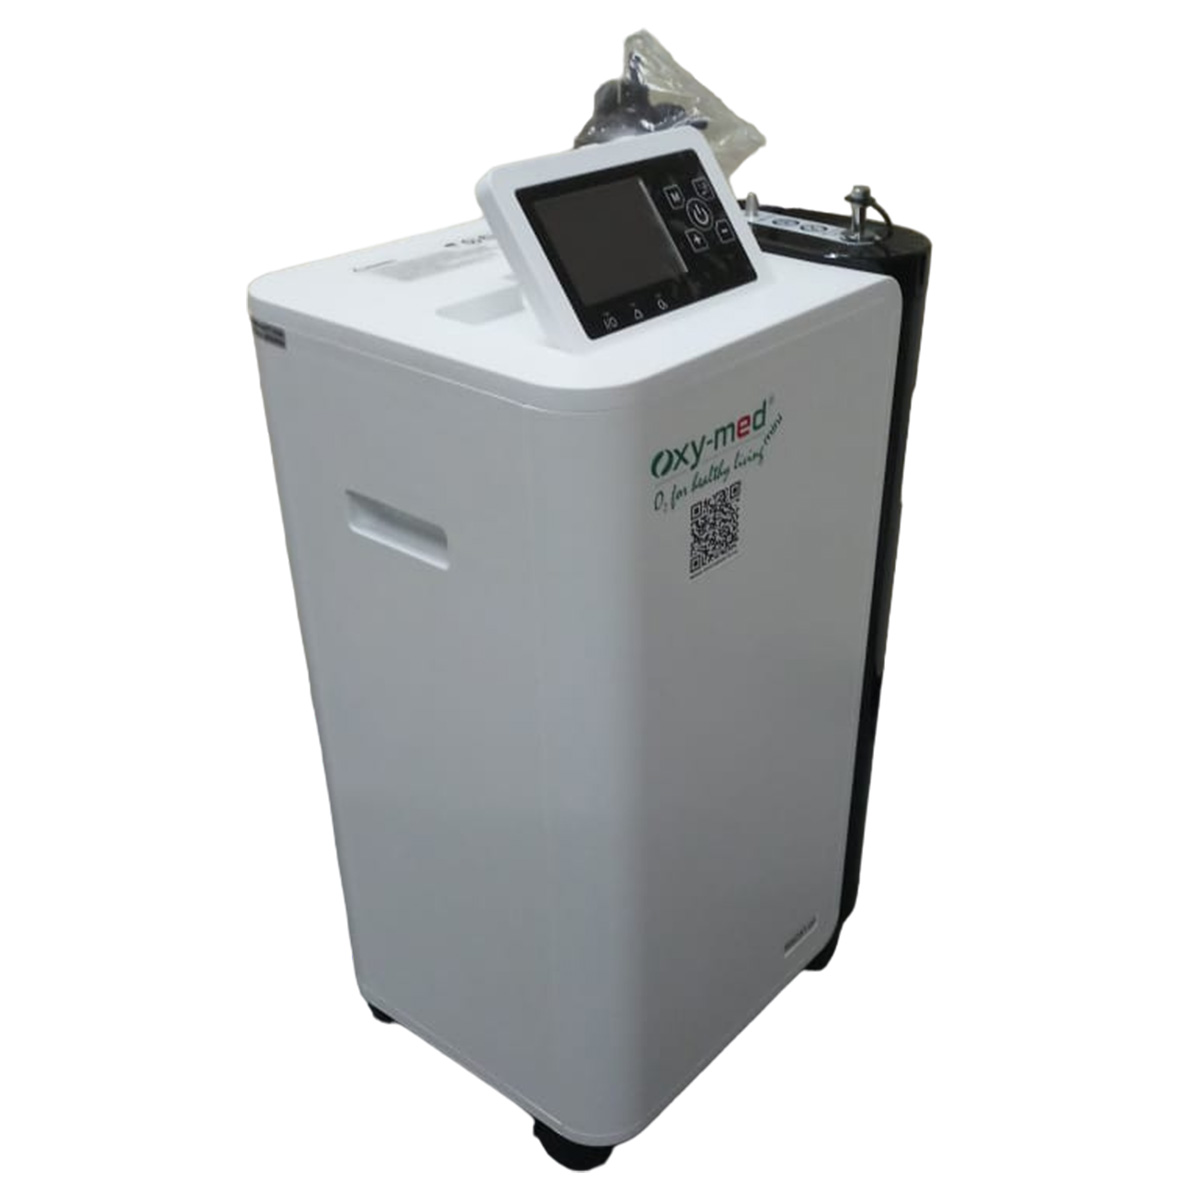 5 Lpm Oxymed Oxygen Concentrator On Sale Suppliers, Service Provider in Anand vihar